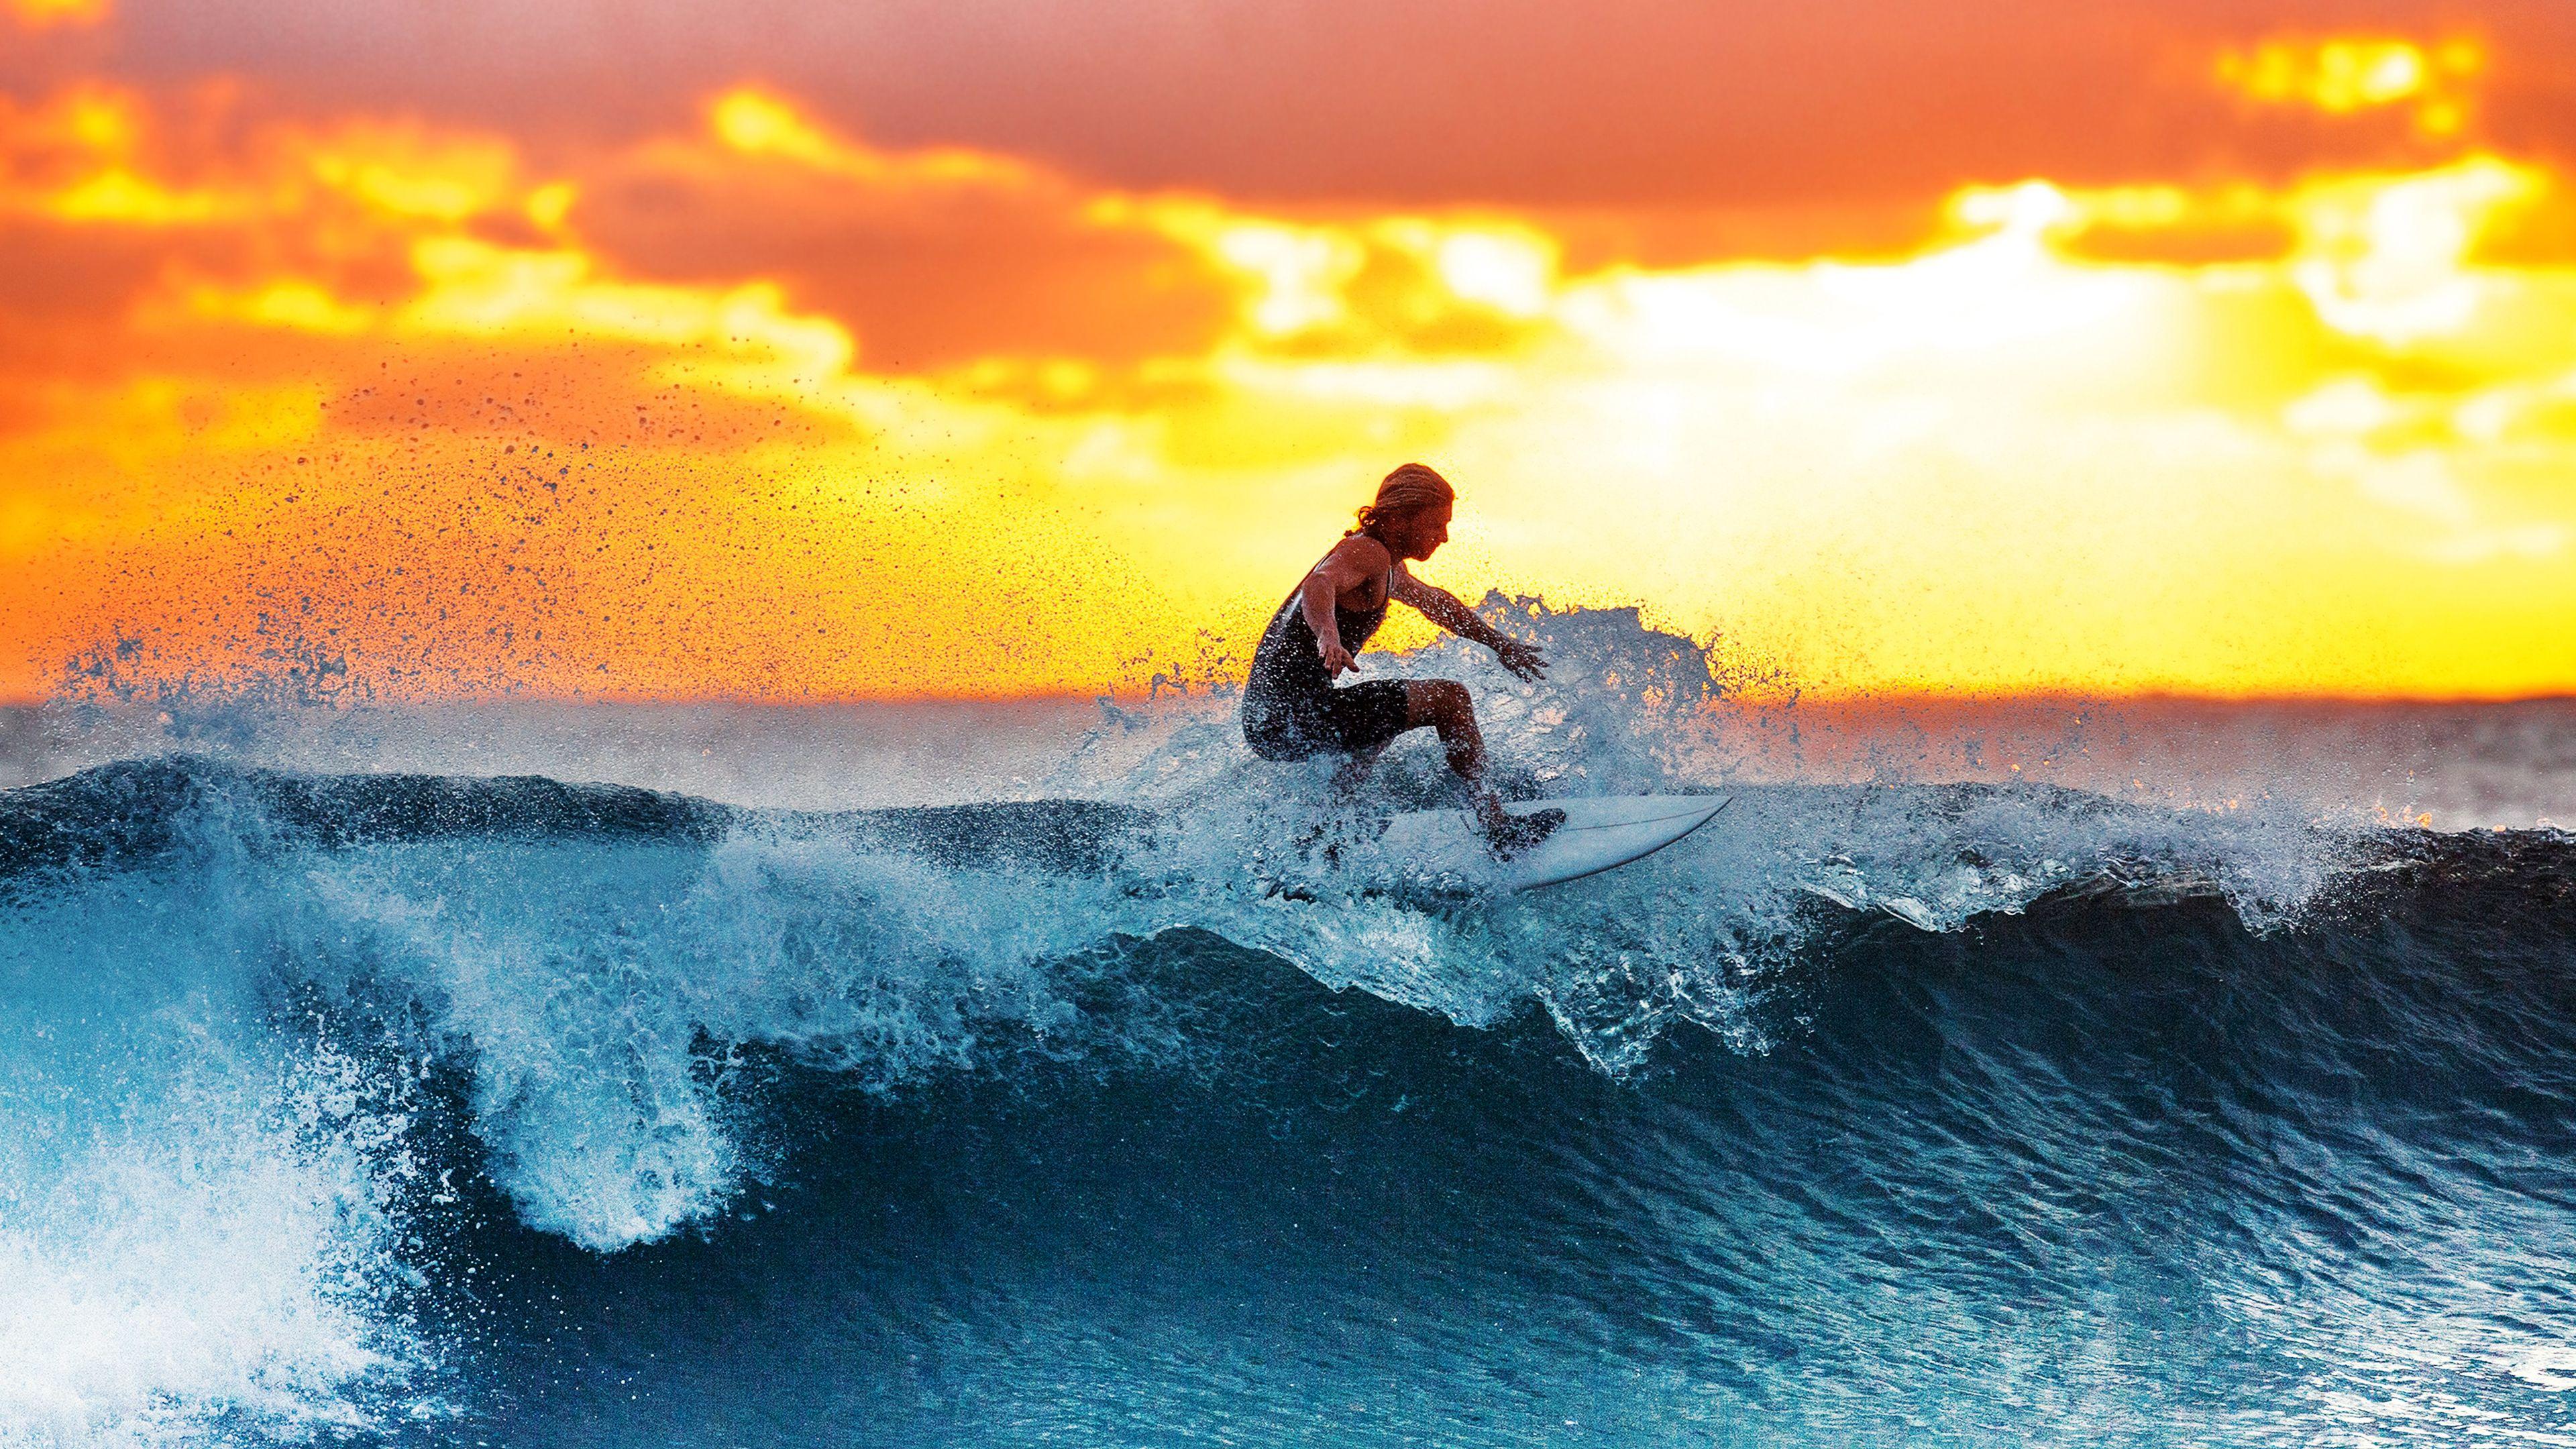 3840 x 2160 · jpeg - Cool Surfing Wallpapers - Top Free Cool Surfing Backgrounds ...